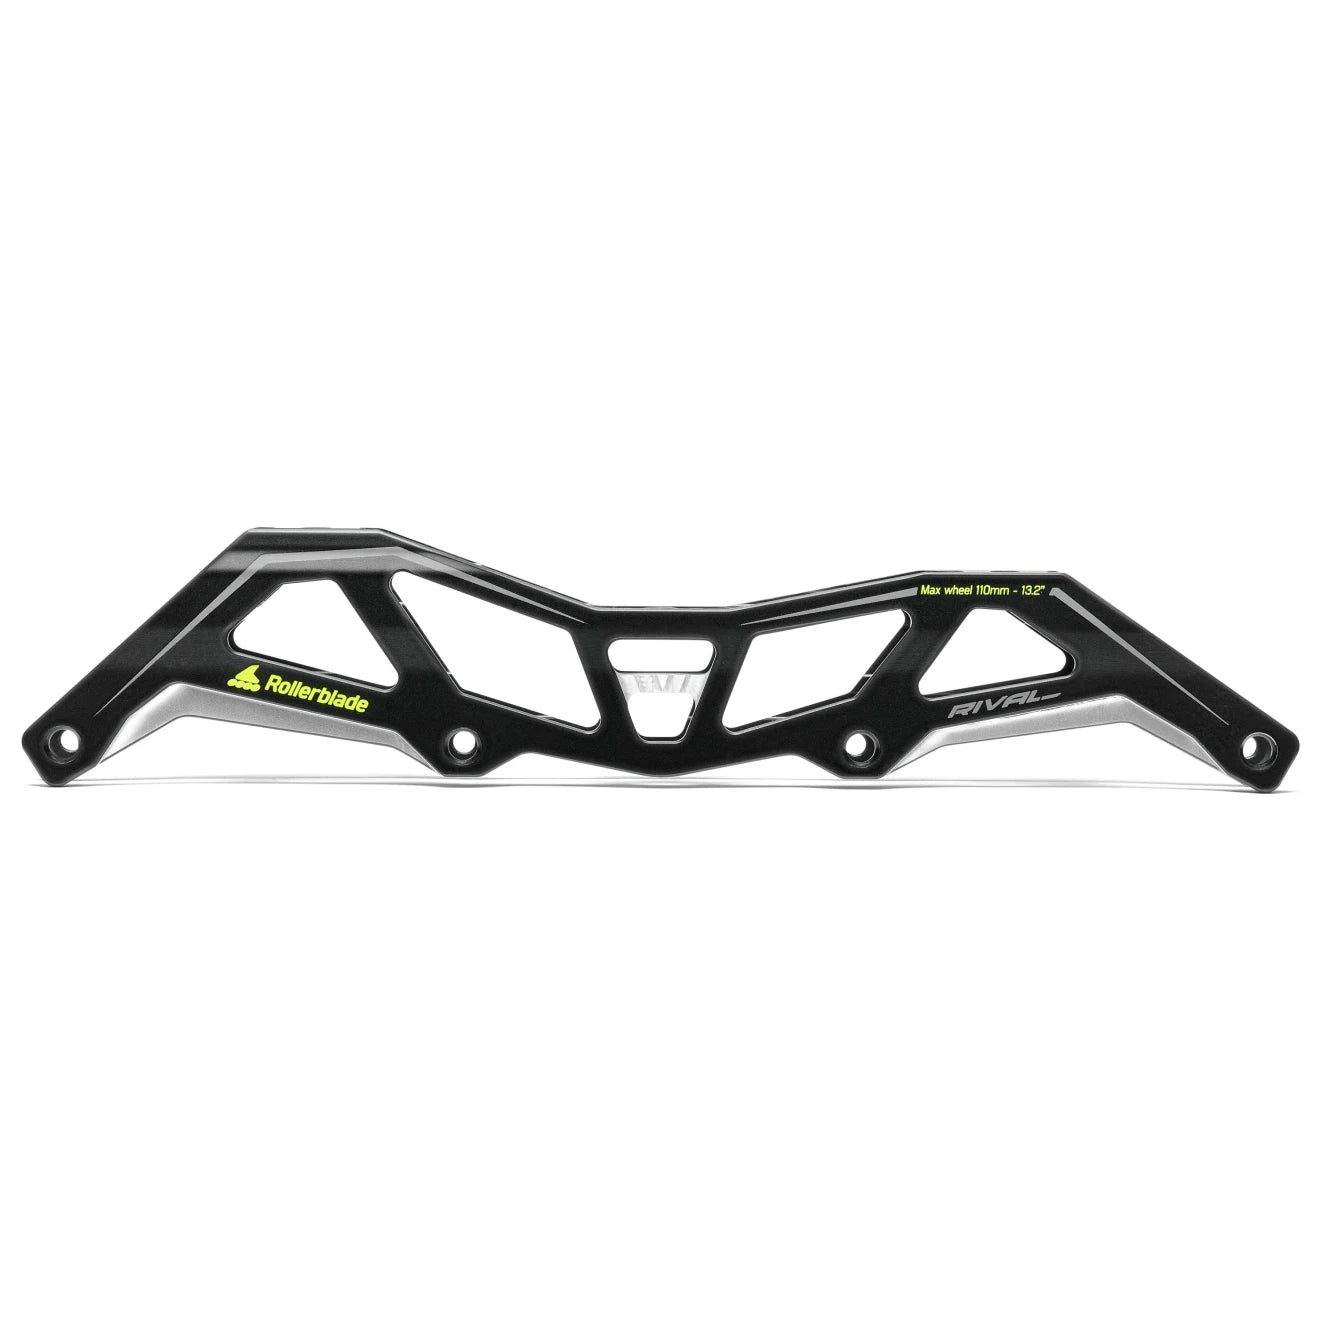 Rollerblade Rival 13.2 Frame - 3x110